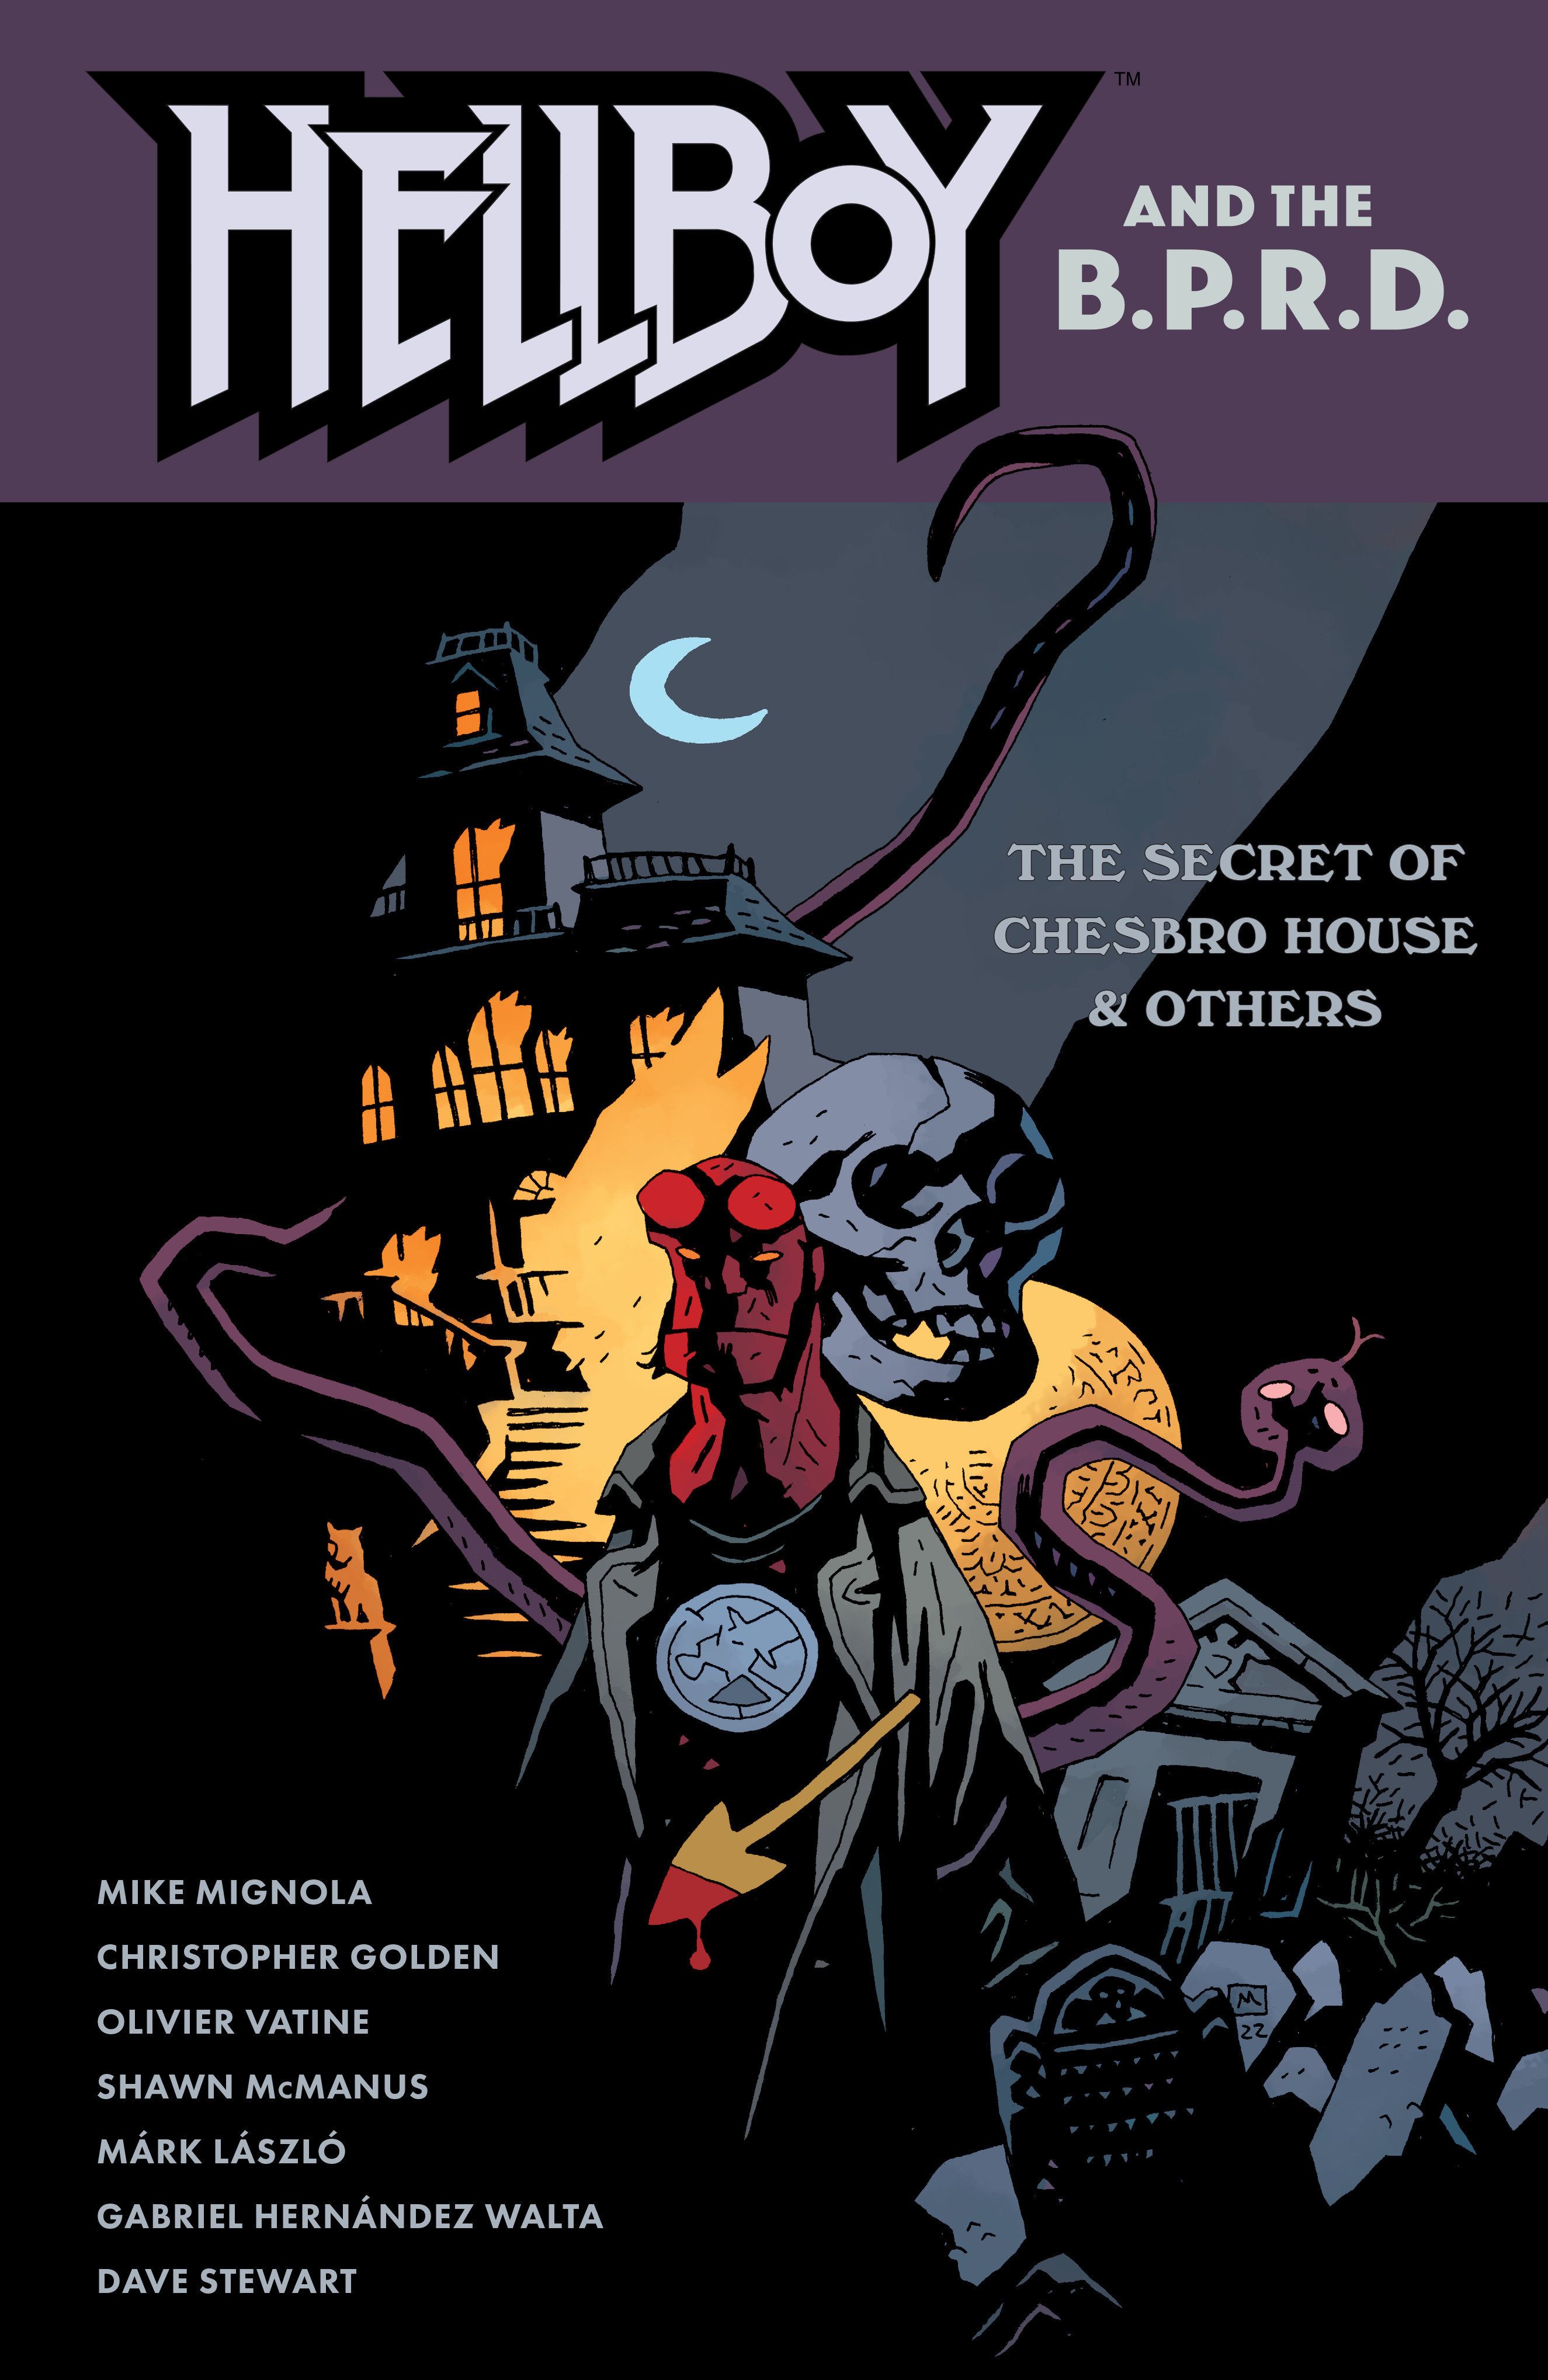 Hellboy and the B.P.R.D. The Secret of Chesbro House & Others